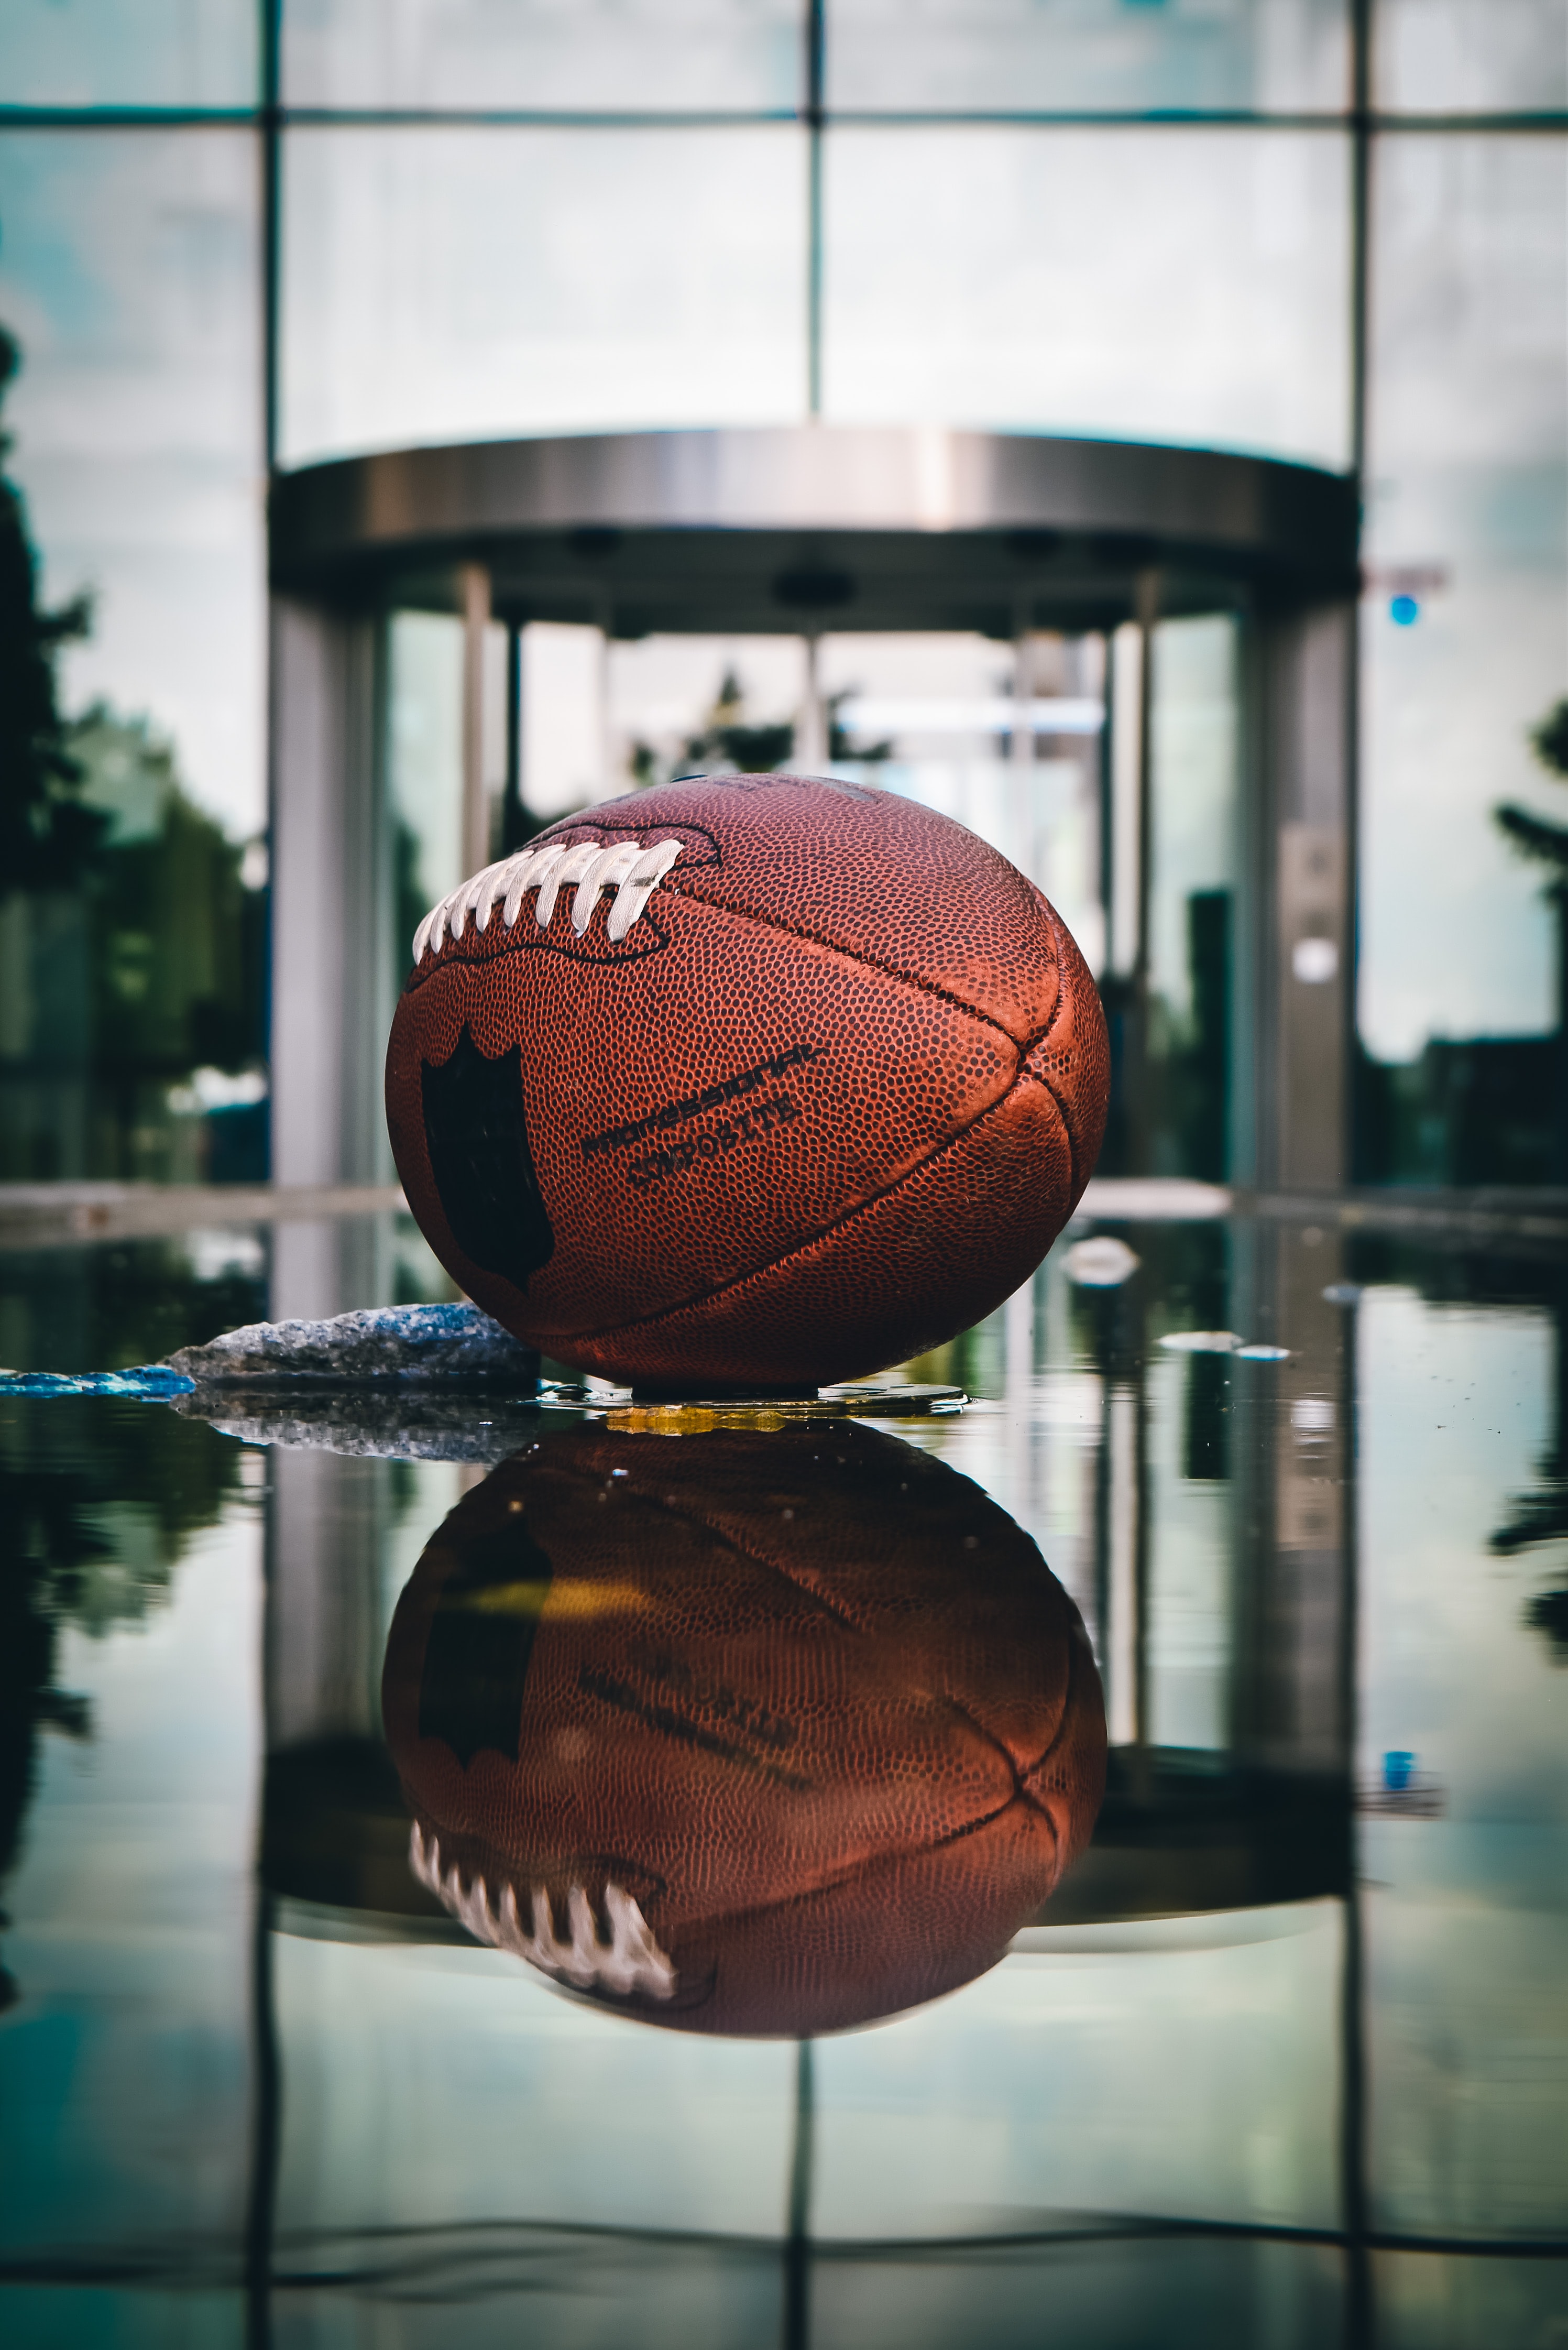 rugby, sports, reflection, miscellanea, miscellaneous, ball